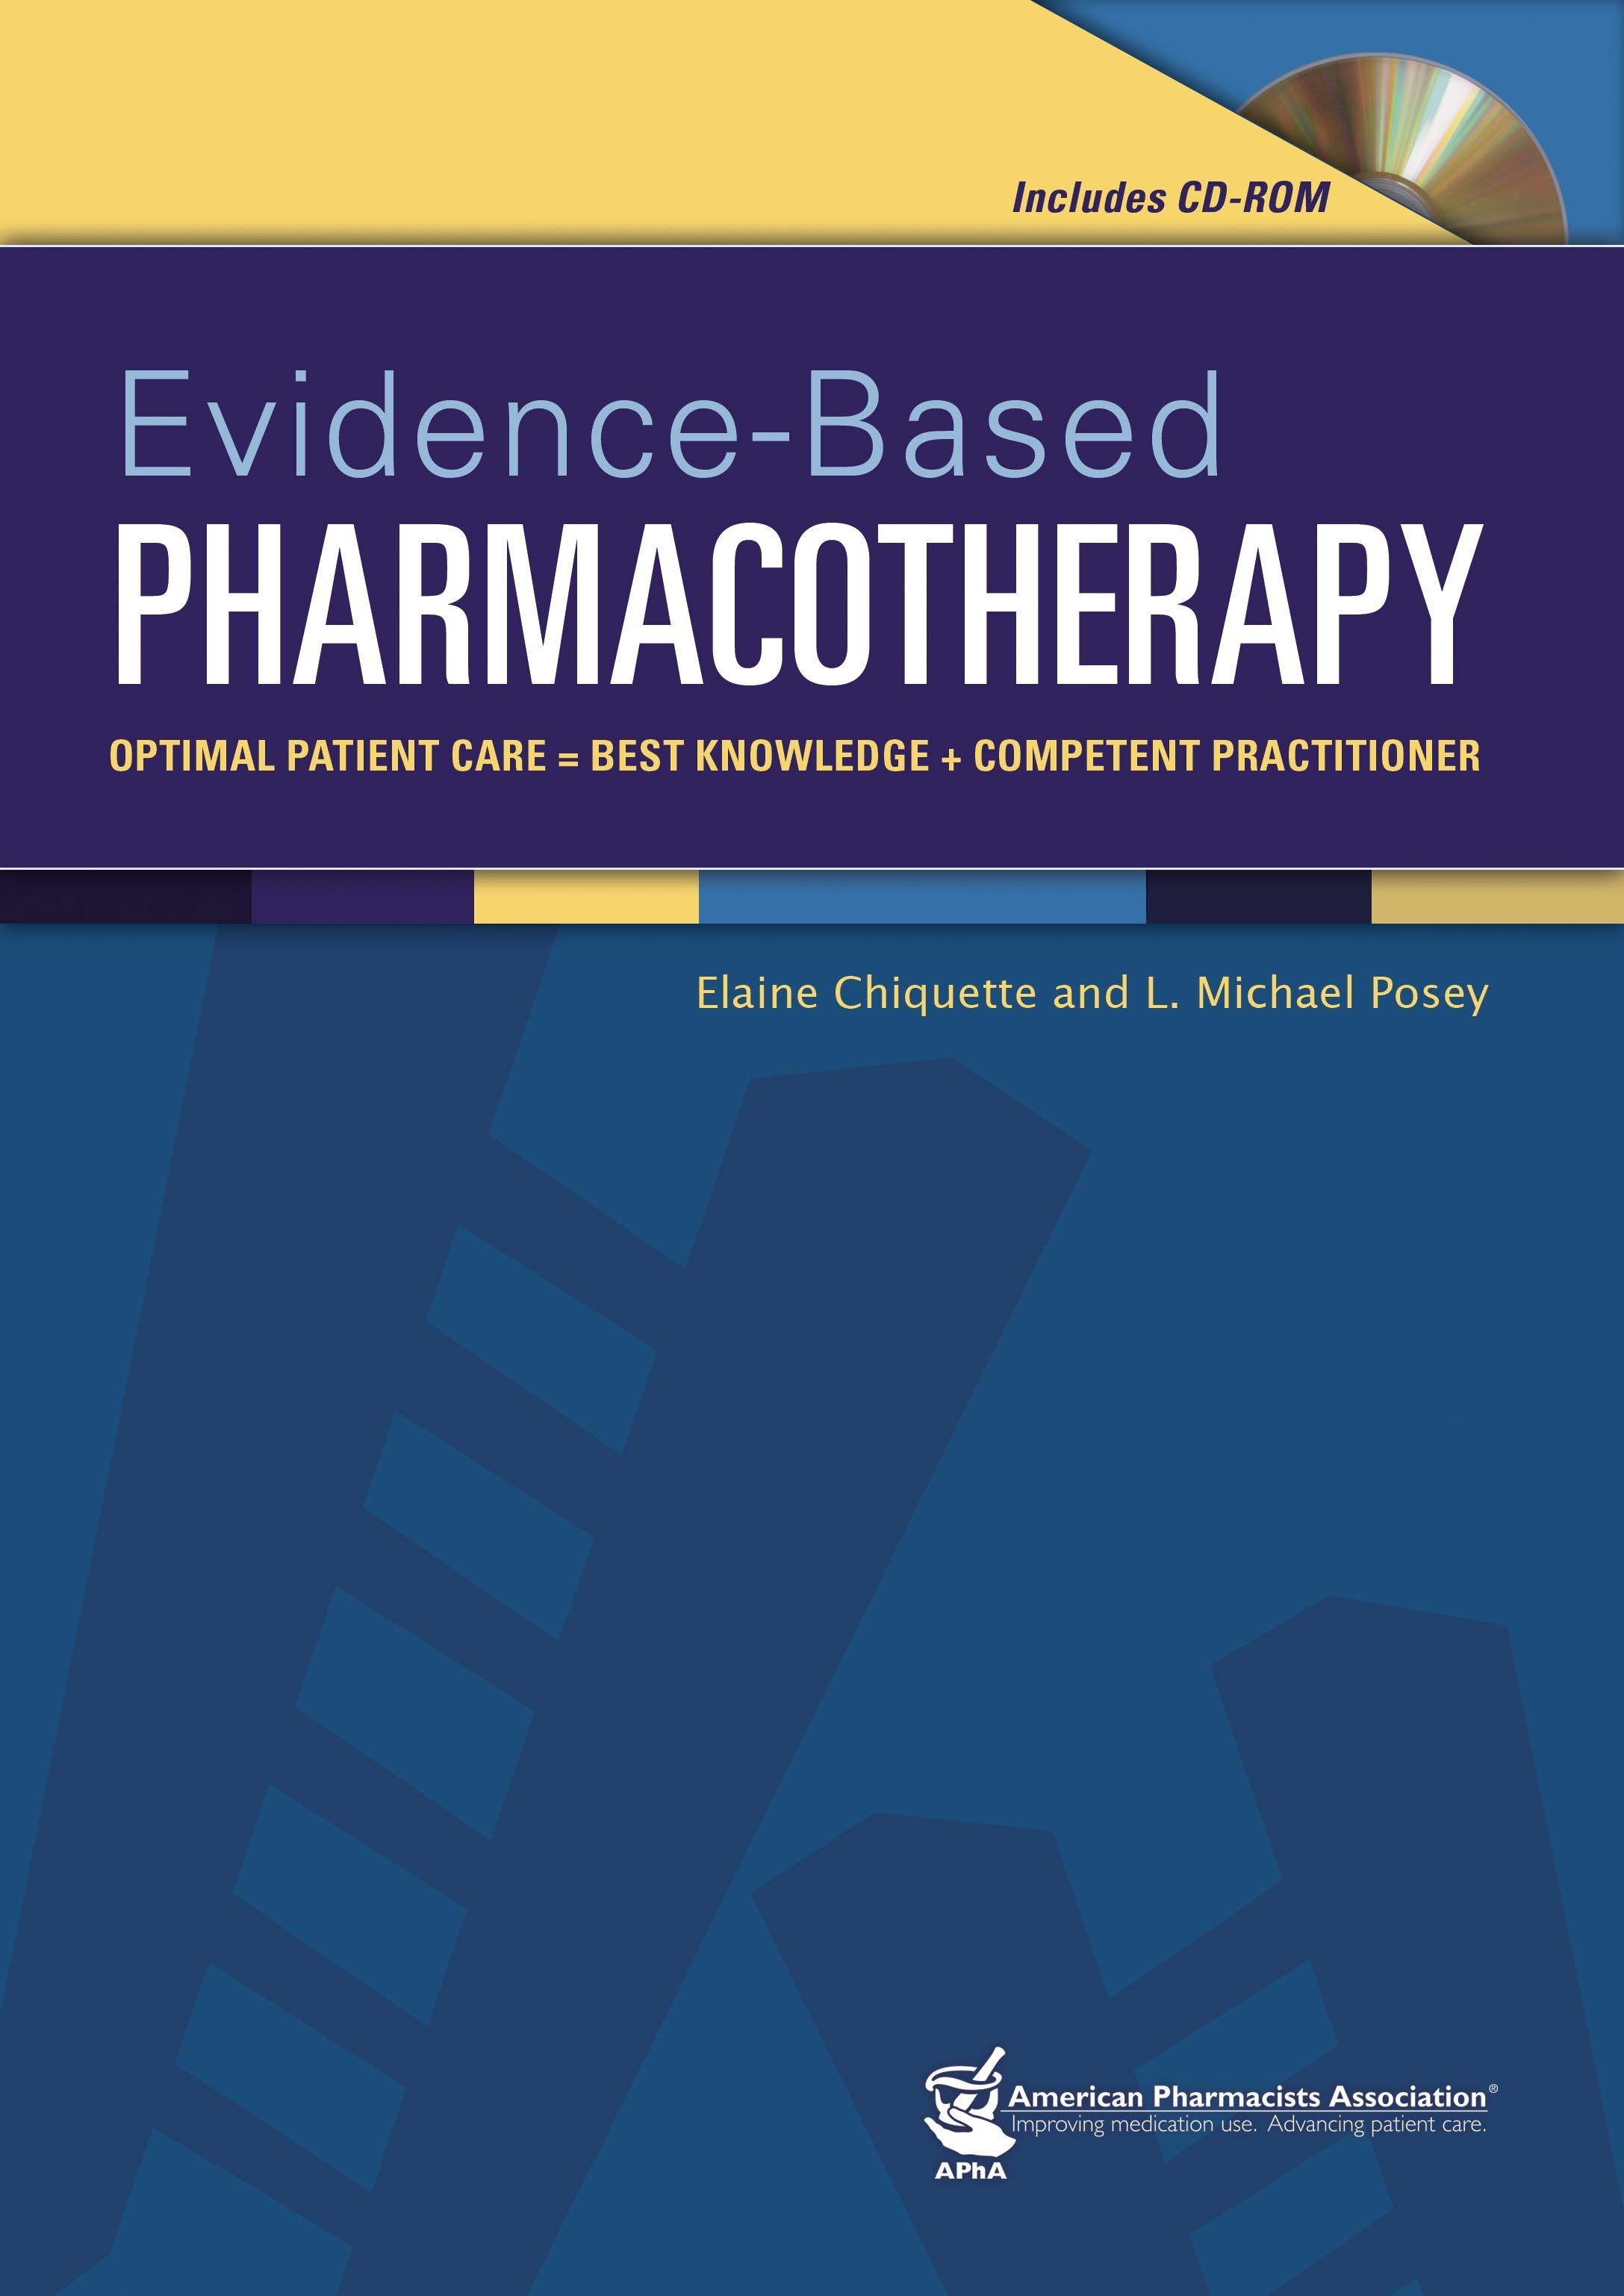 Evidence based pharmacotherapy